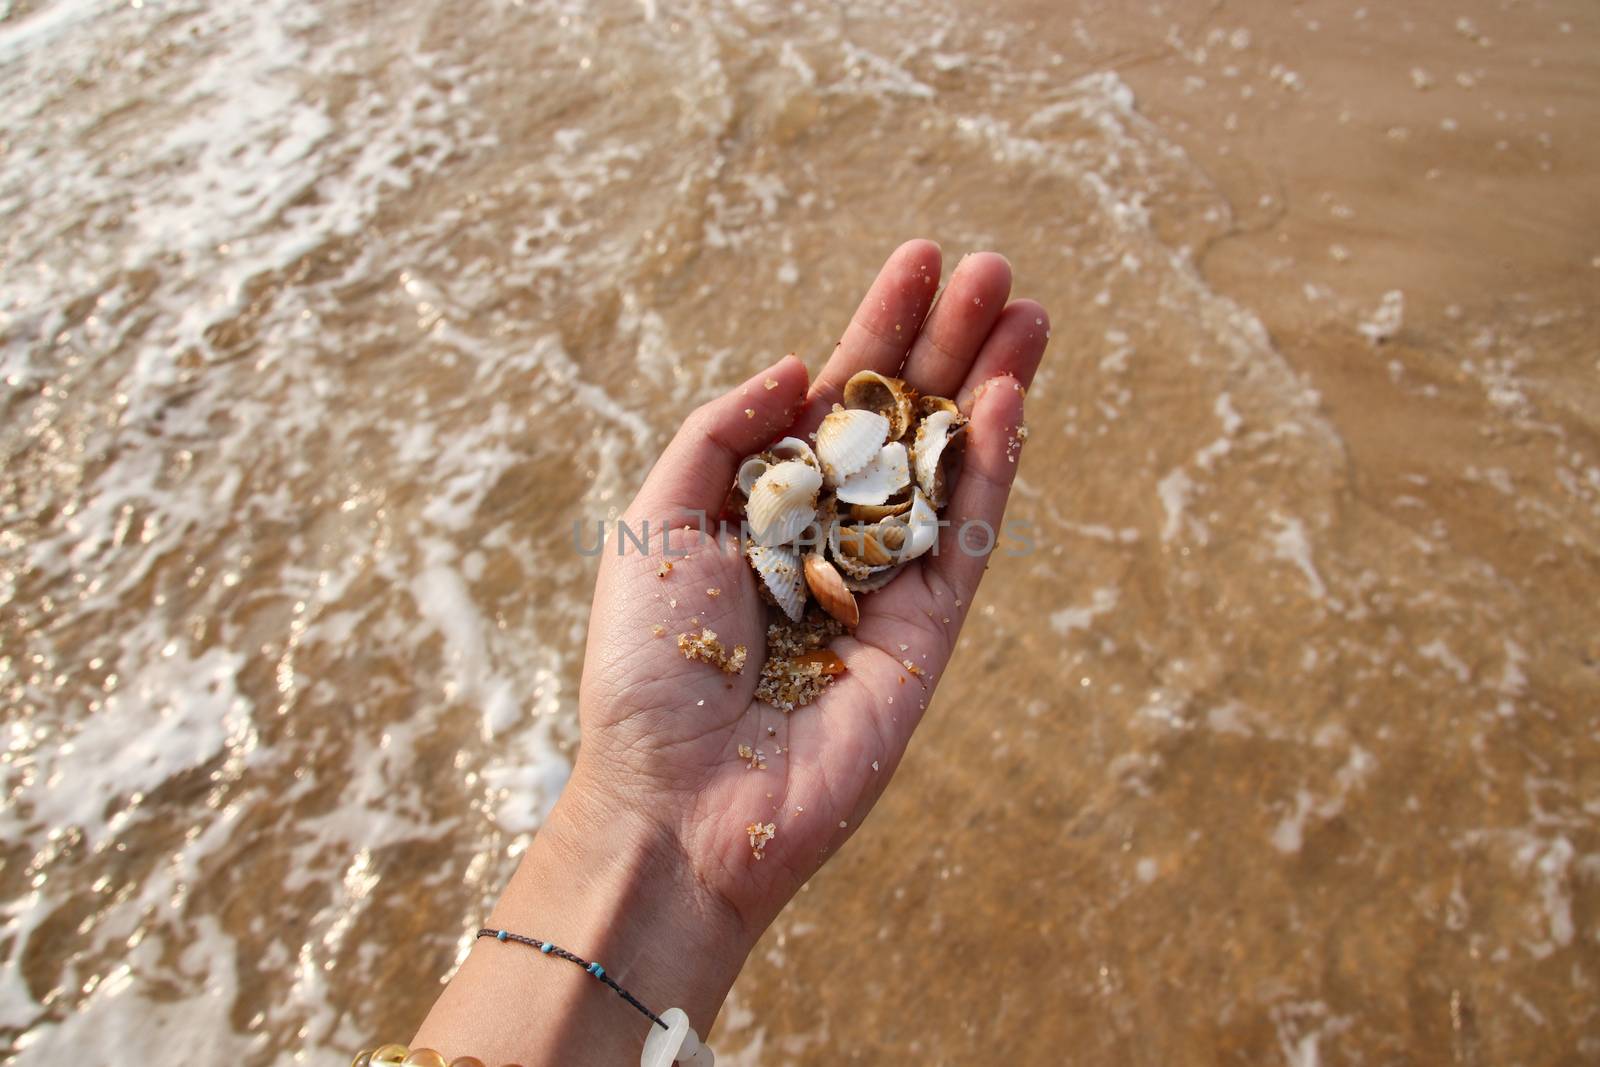 Collecting Seashells on a Summer Day by Sonnet15